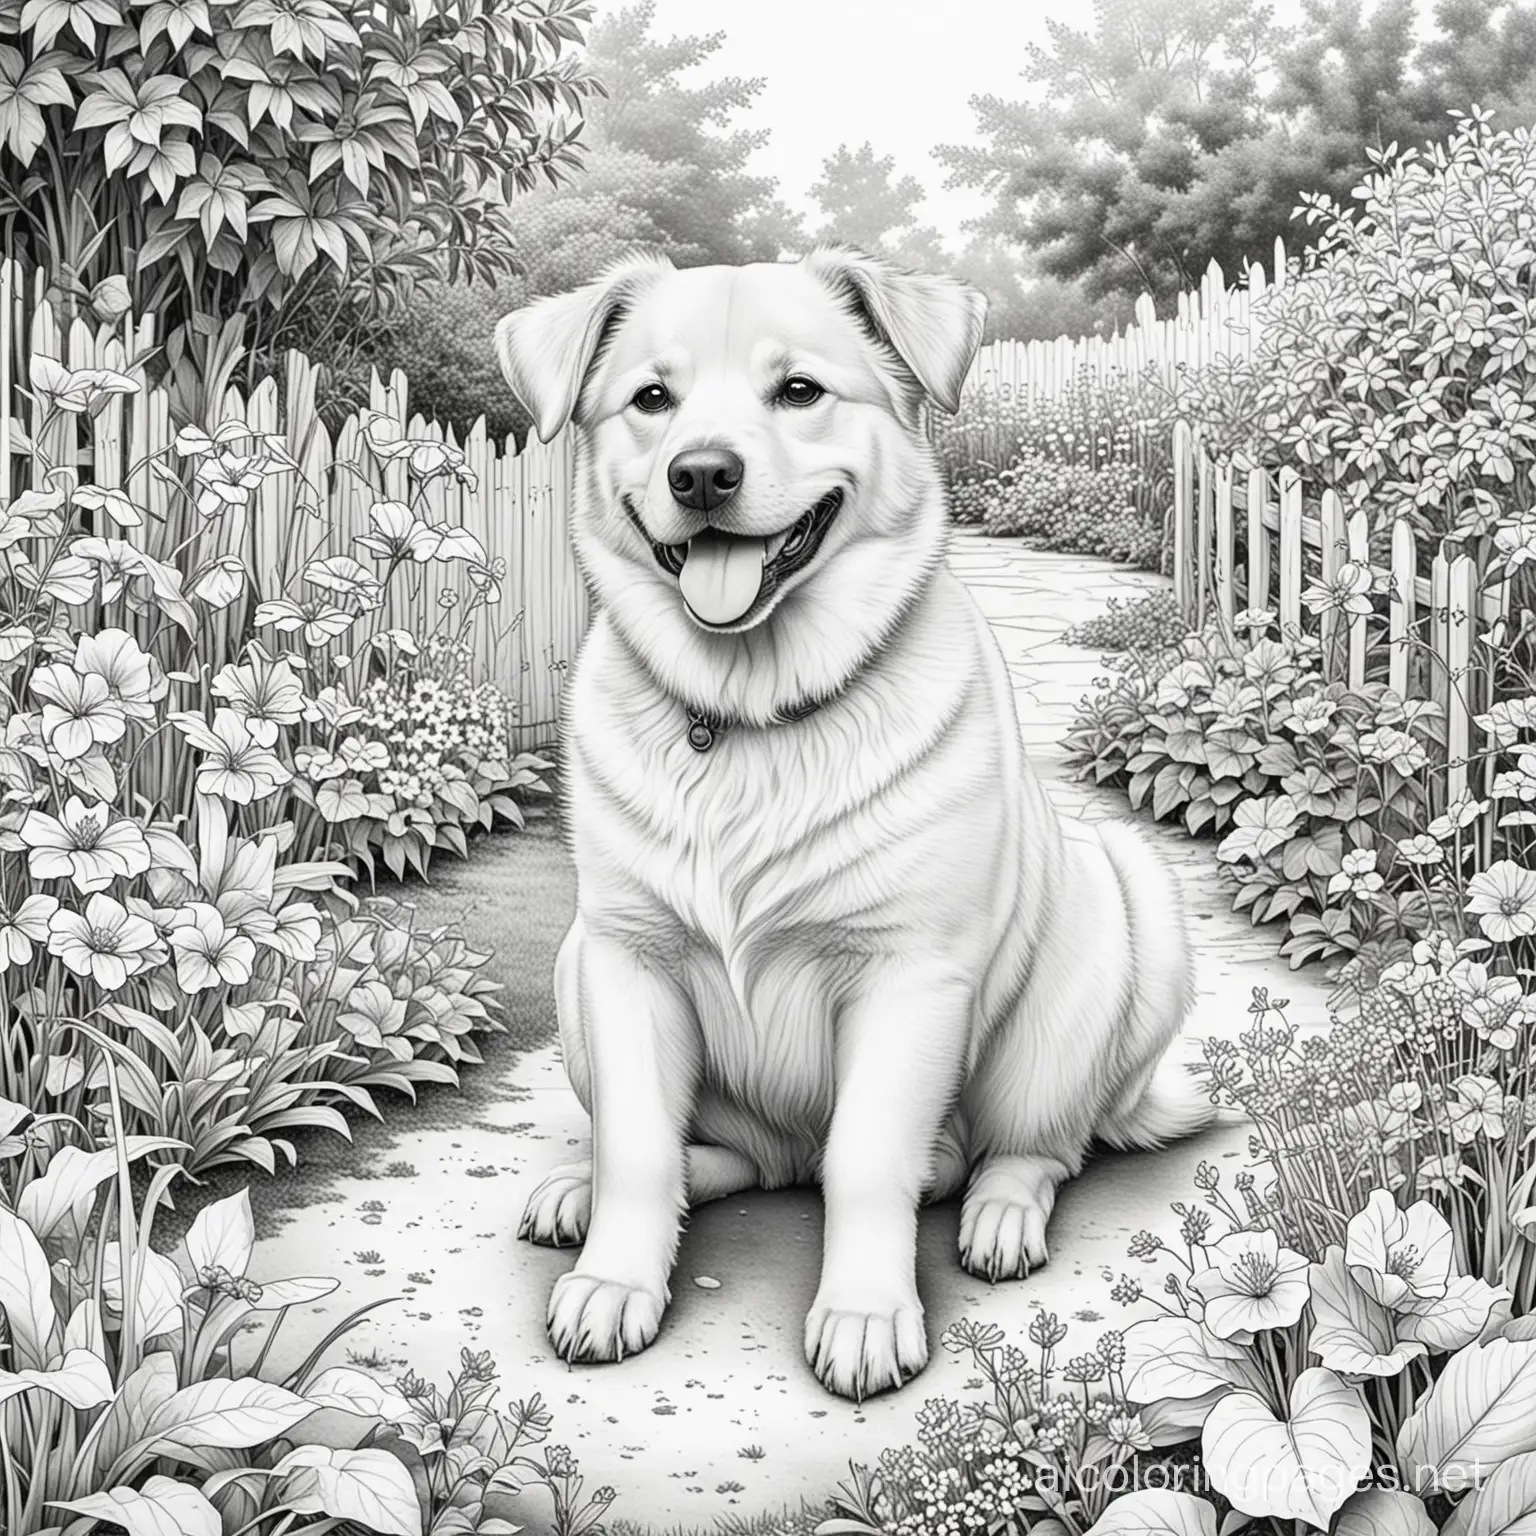 a happy dog in the garden, Coloring Page, black and white, line art, white background, Simplicity, Ample White Space. The background of the coloring page is plain white to make it easy for young children to color within the lines. The outlines of all the subjects are easy to distinguish, making it simple for kids to color without too much difficulty